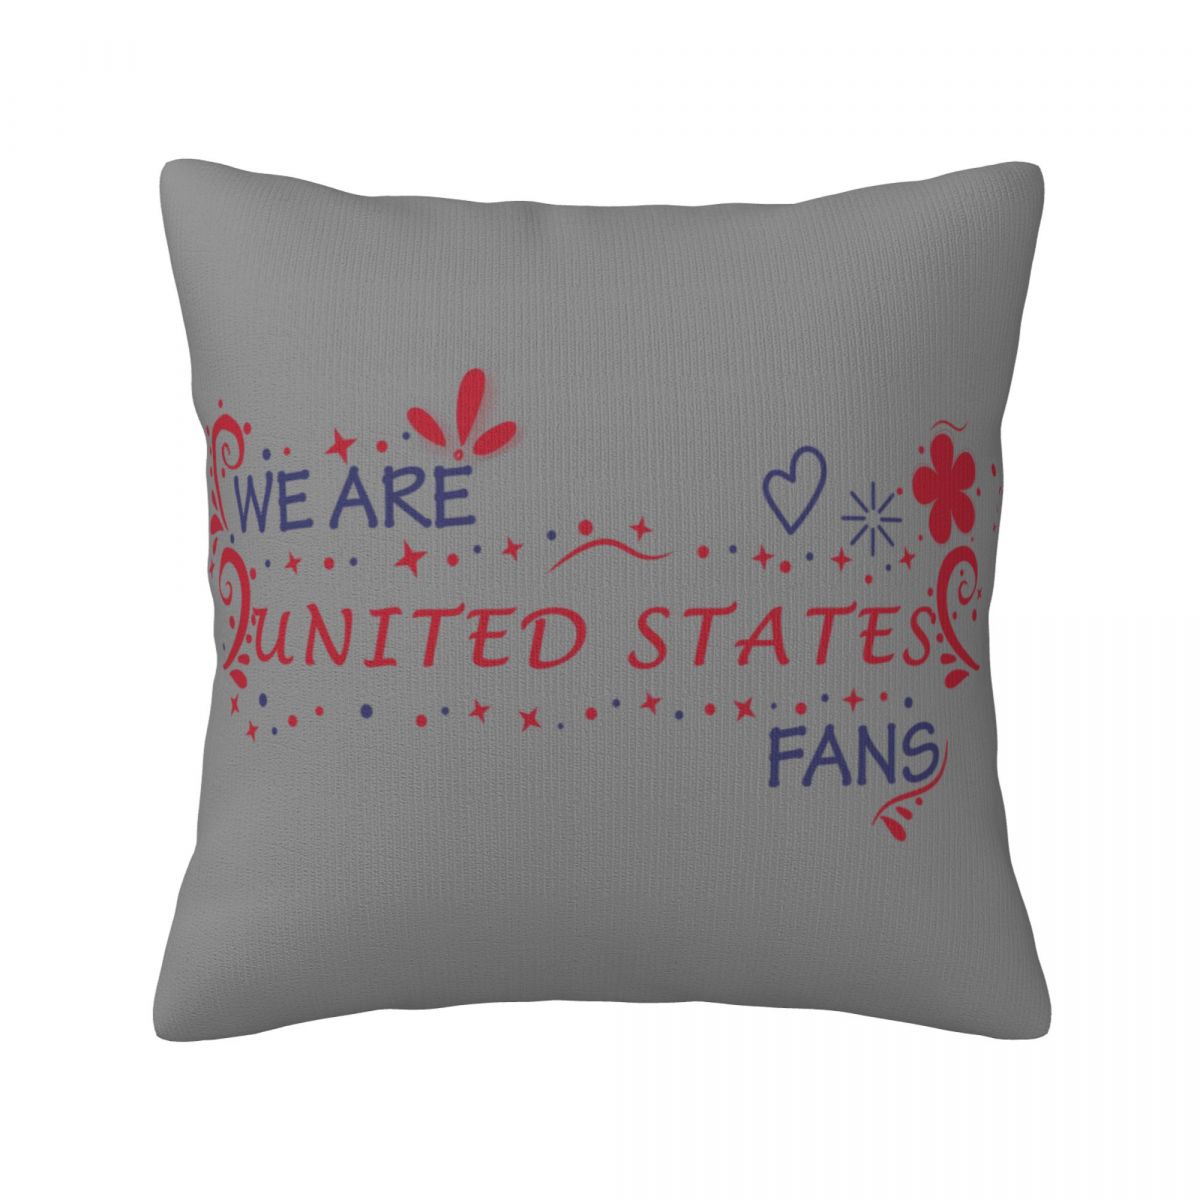 We Are United States Fans Decorative Square Throw Pillow Covers